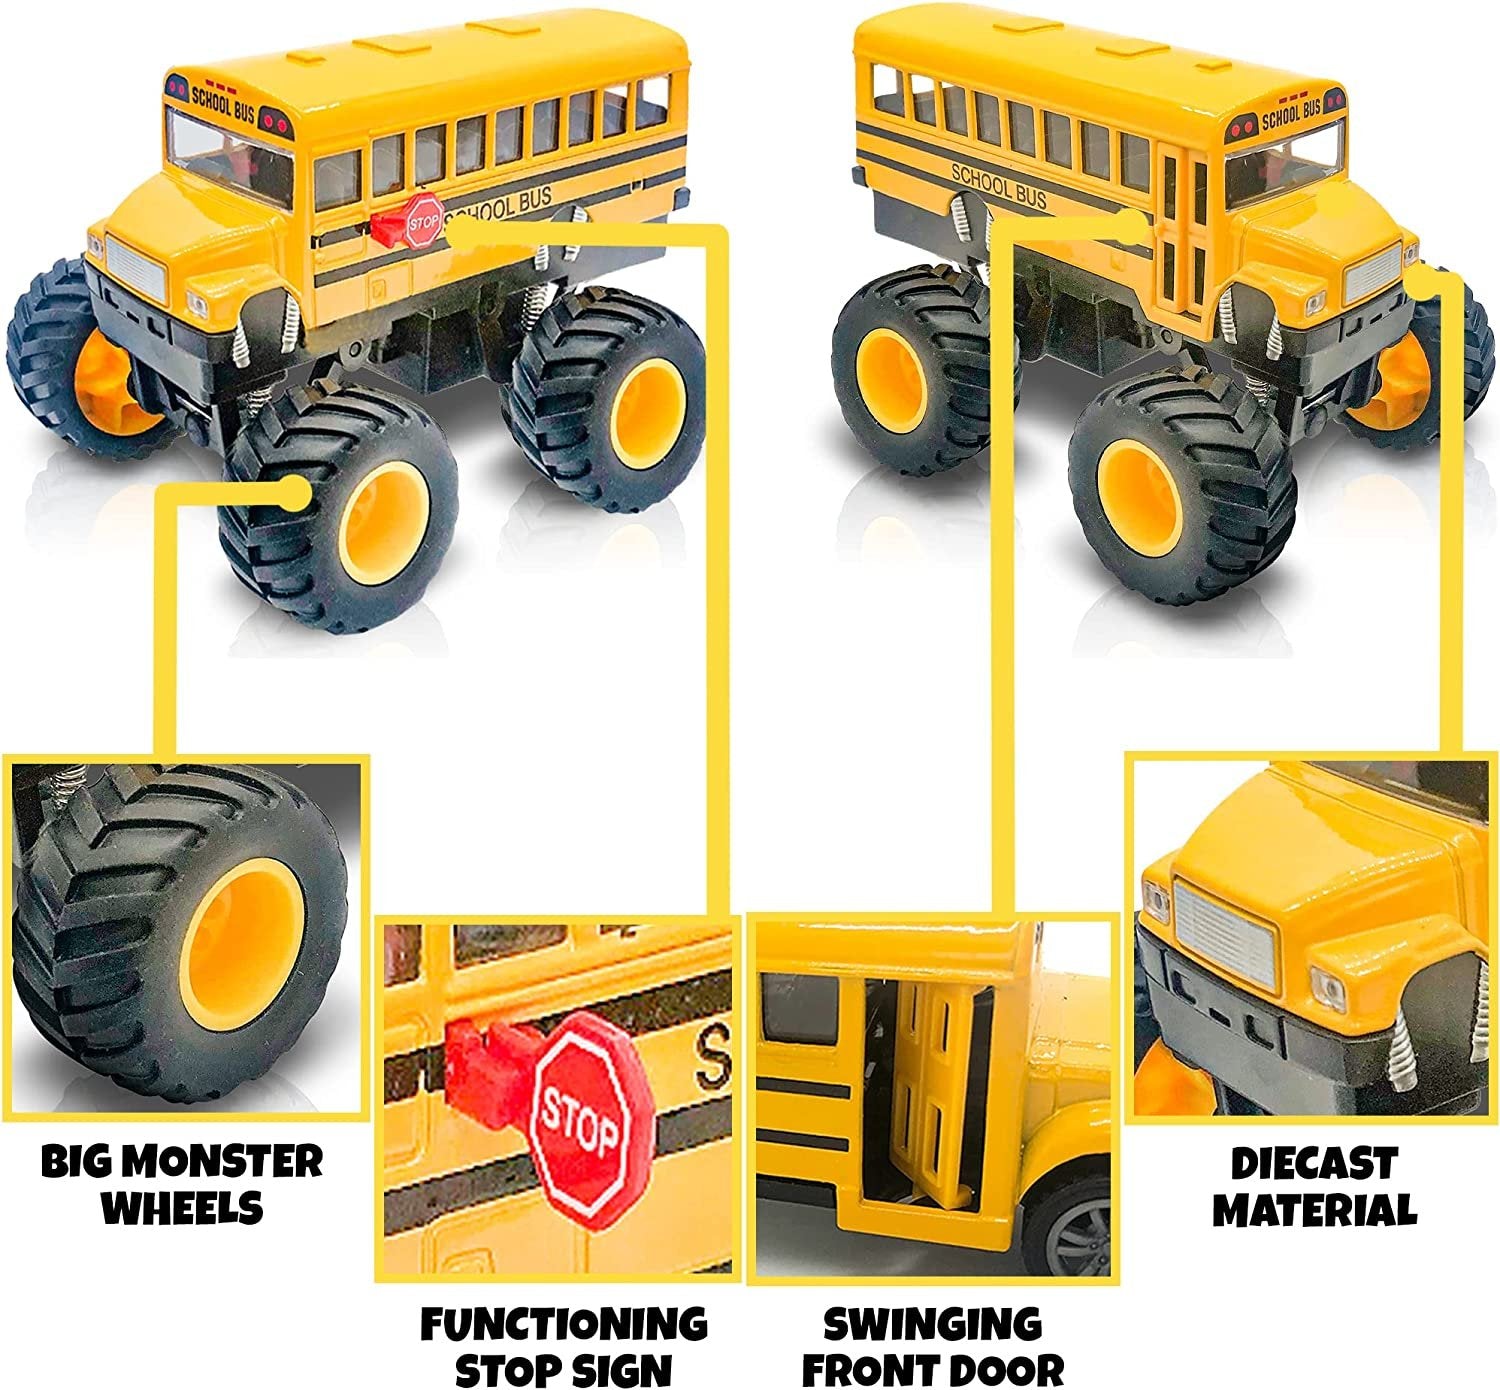 5" Monster School Bus, Super Monster Bus with Pullback Mechanism, Diecast Monster Truck Bus for Kids, Big Wheels Monster Truck Toys, Play Vehicle Gifts for Boys